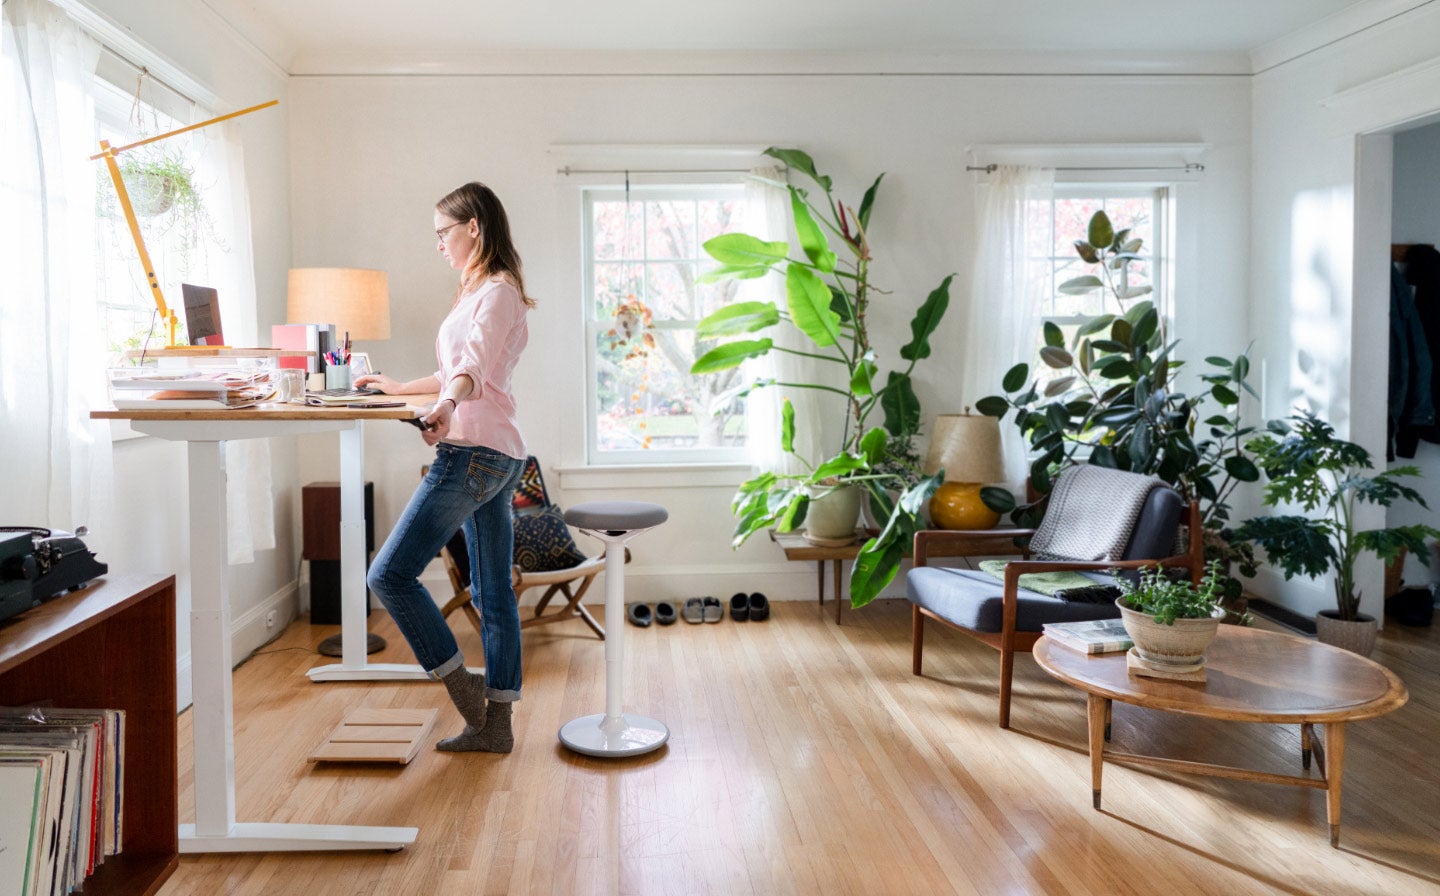 woman is working on a table and some plants are in background showing a fresh indoor environment.